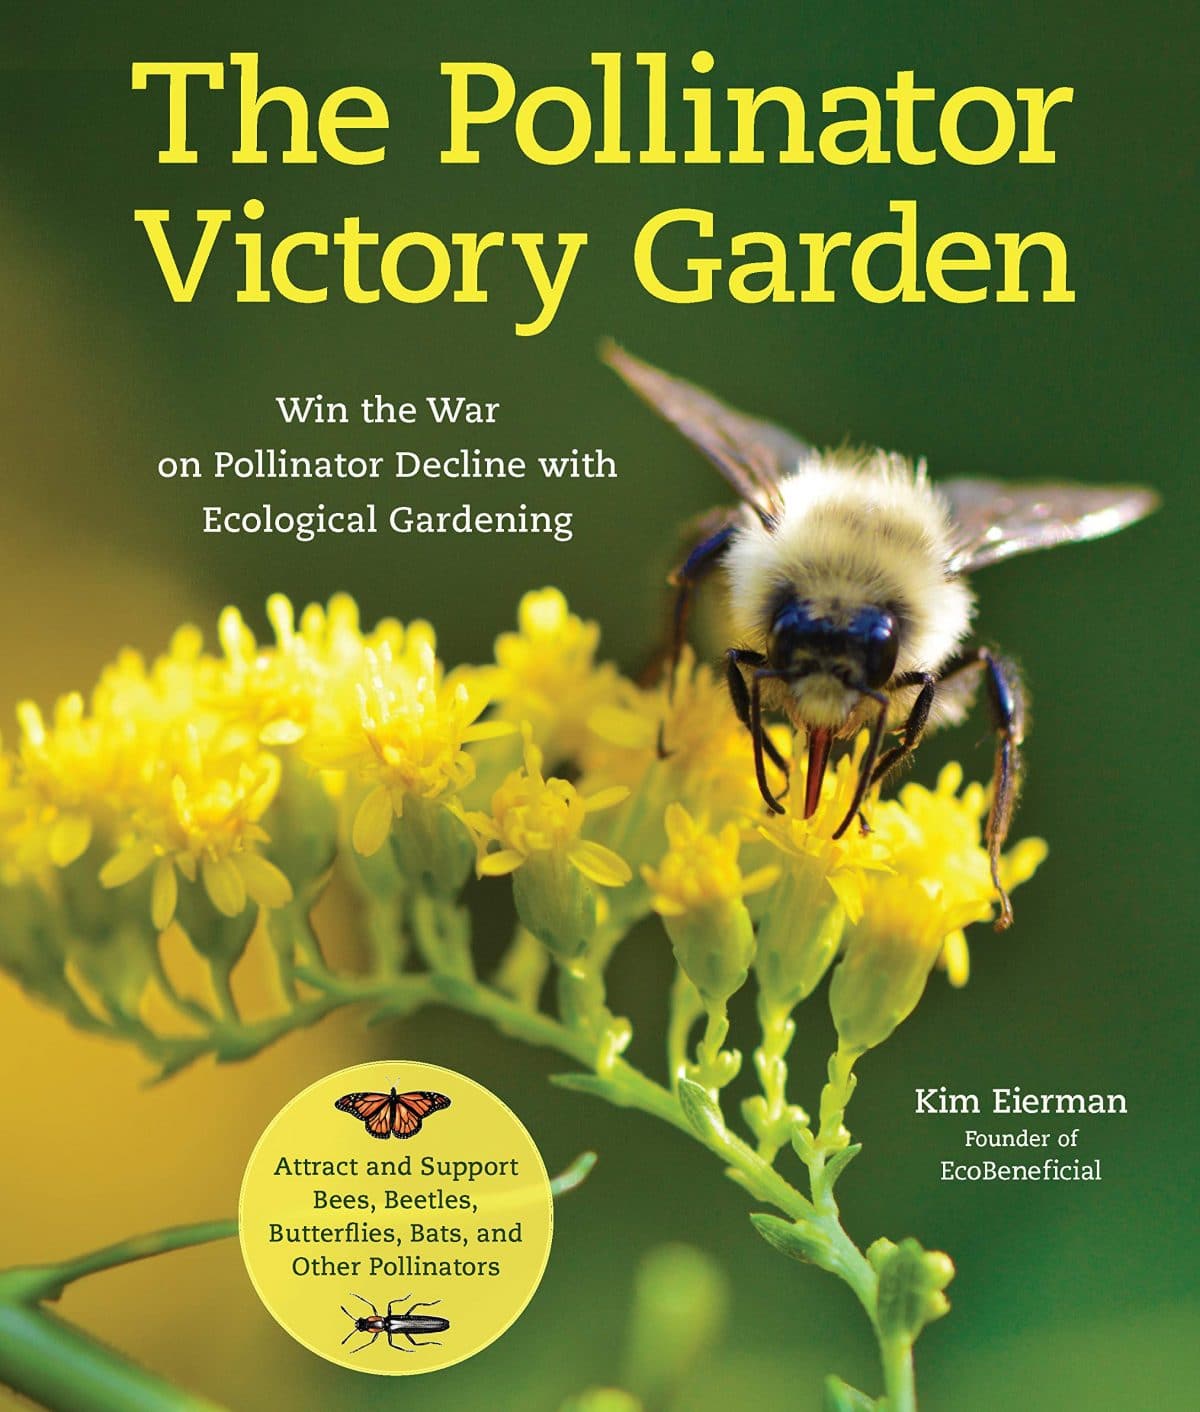 Book Review: The Pollinator Victory Garden - Ecological Landscape Alliance